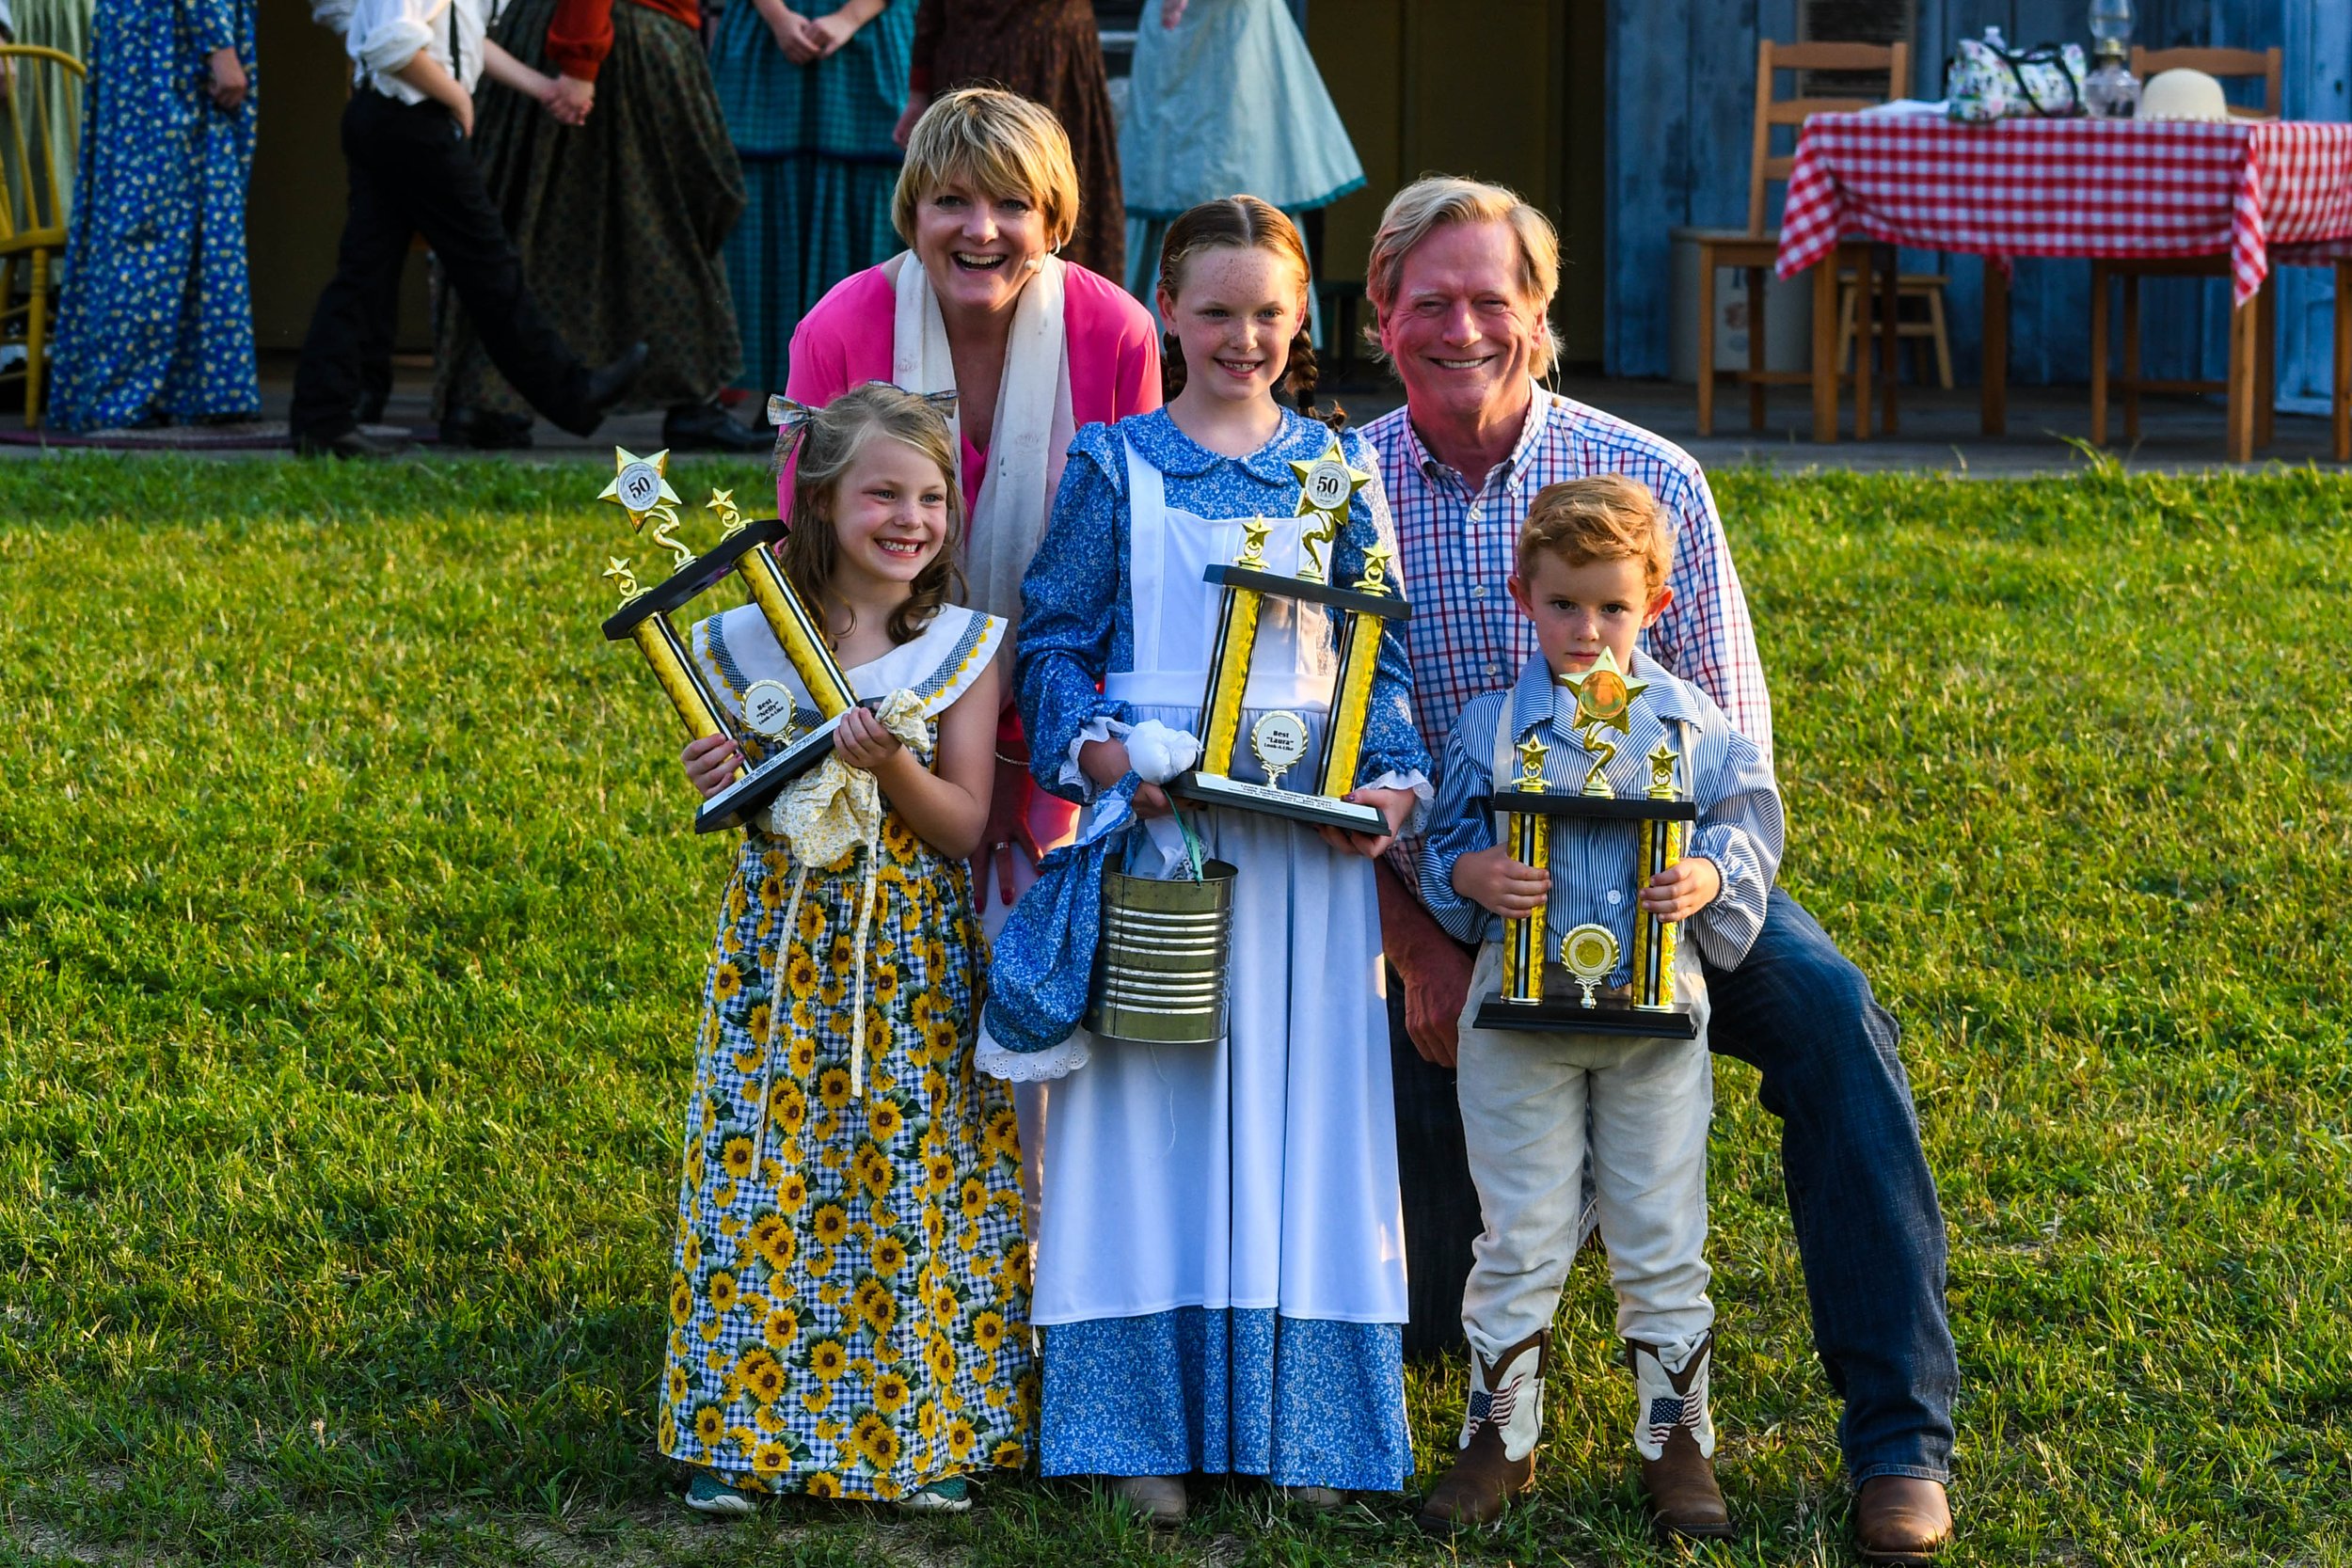 072021 Alison Arngrim and Dean Butler choose Laura, Nellie, and Almanzo look-alike contest winners at the Laura Ingalls Wilder Pageant in De Smet, SD.jpg